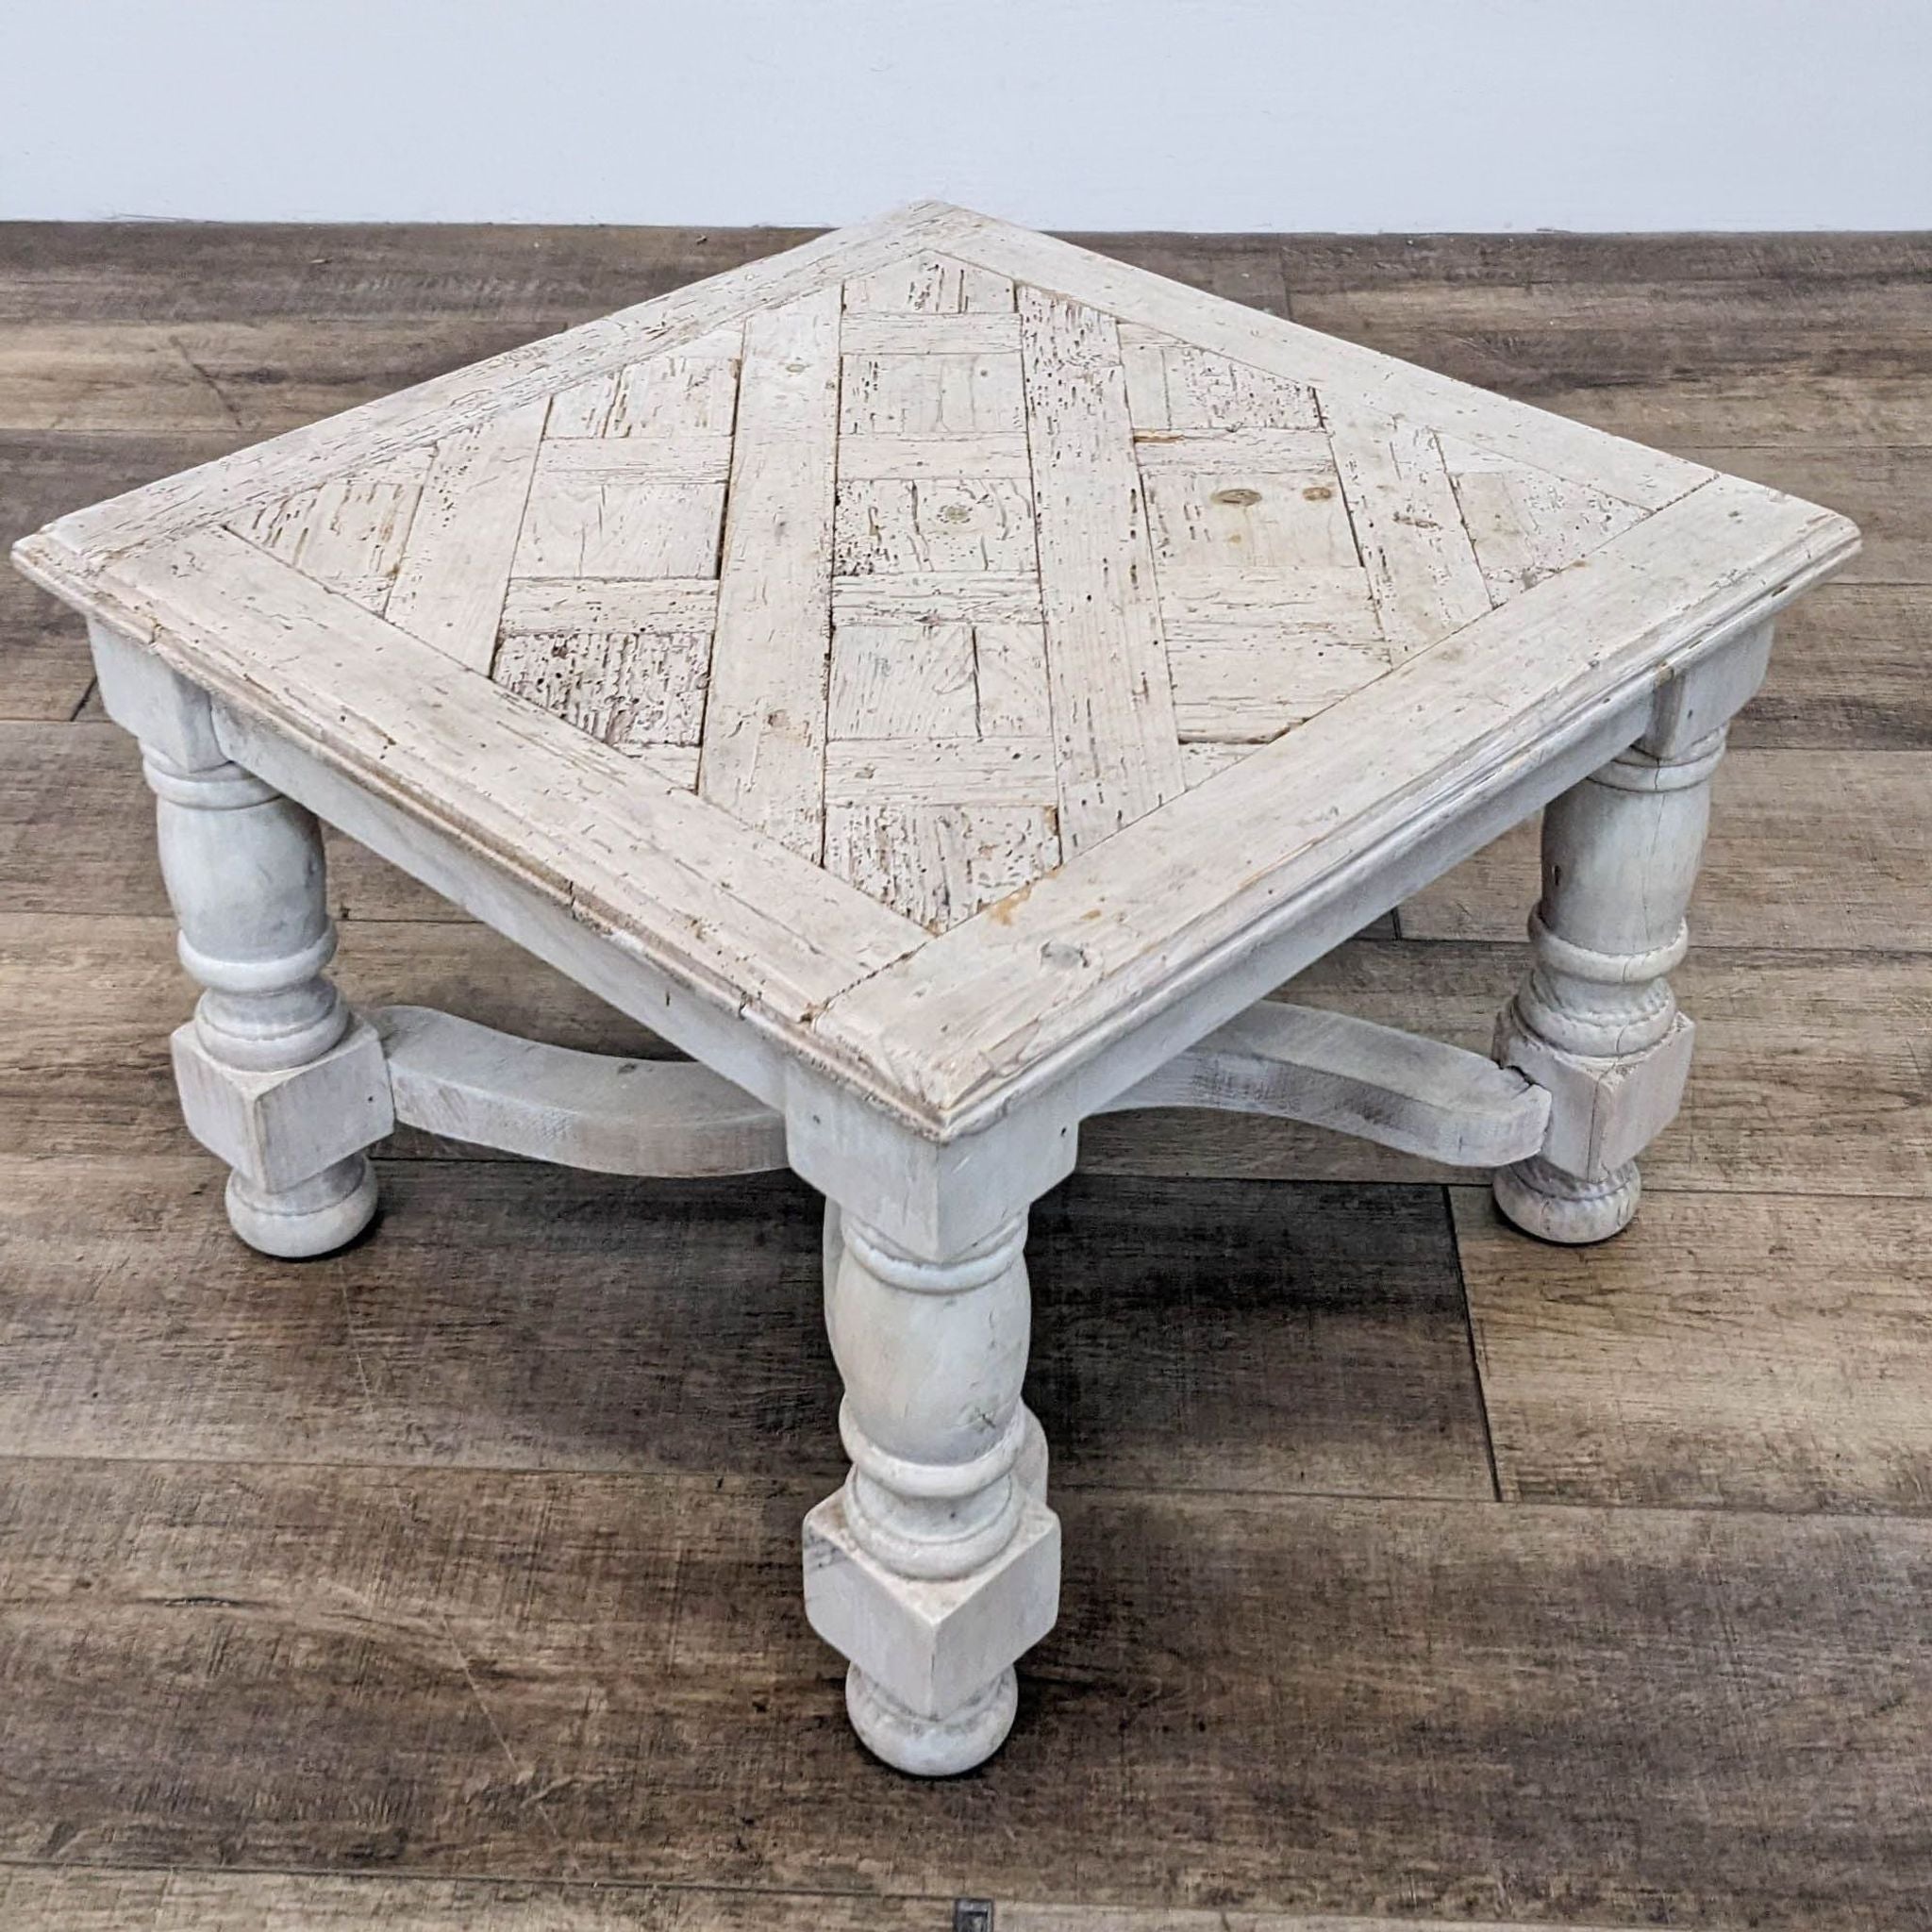 Reperch brand distressed white wooden side table with a square top and turned legs on a wooden floor.